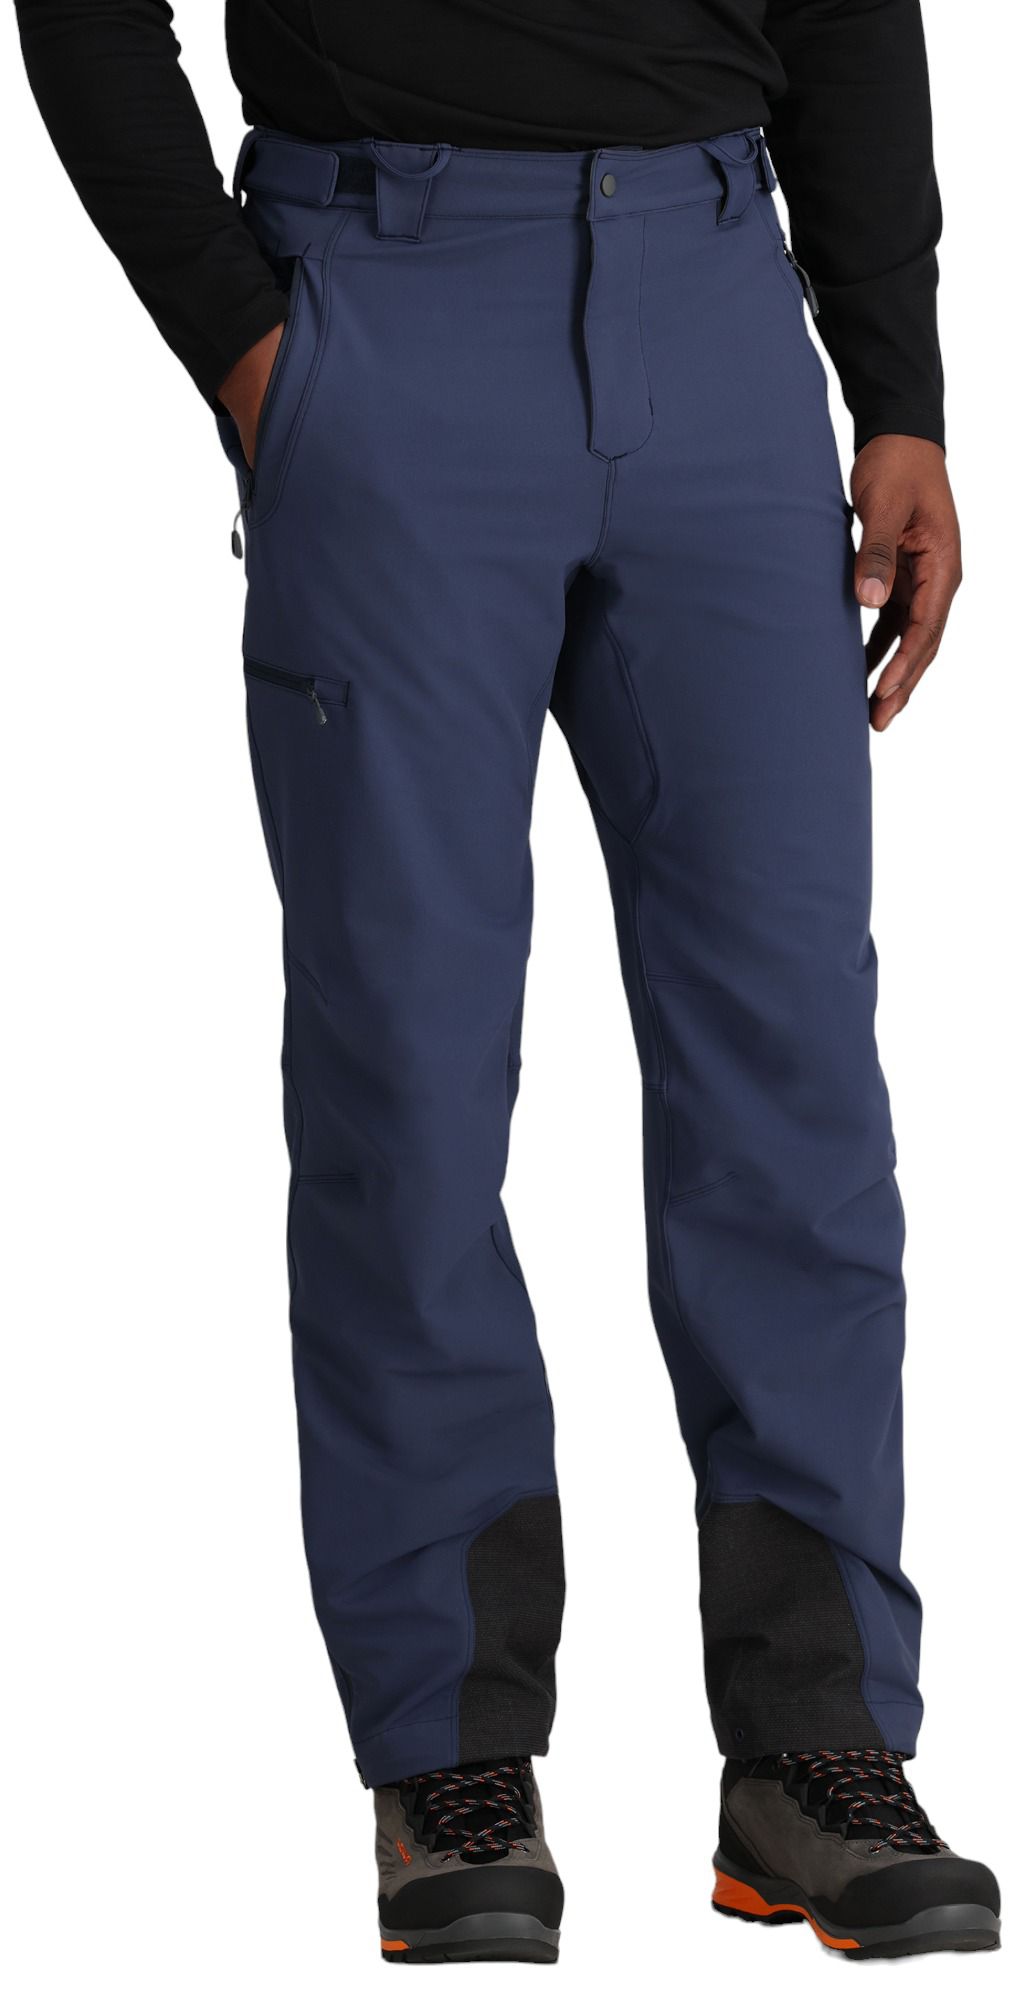 Photos - Ski Wear Outdoor Research Men's Cirque II Pant, Large, Naval Blue | Father's Day Gi